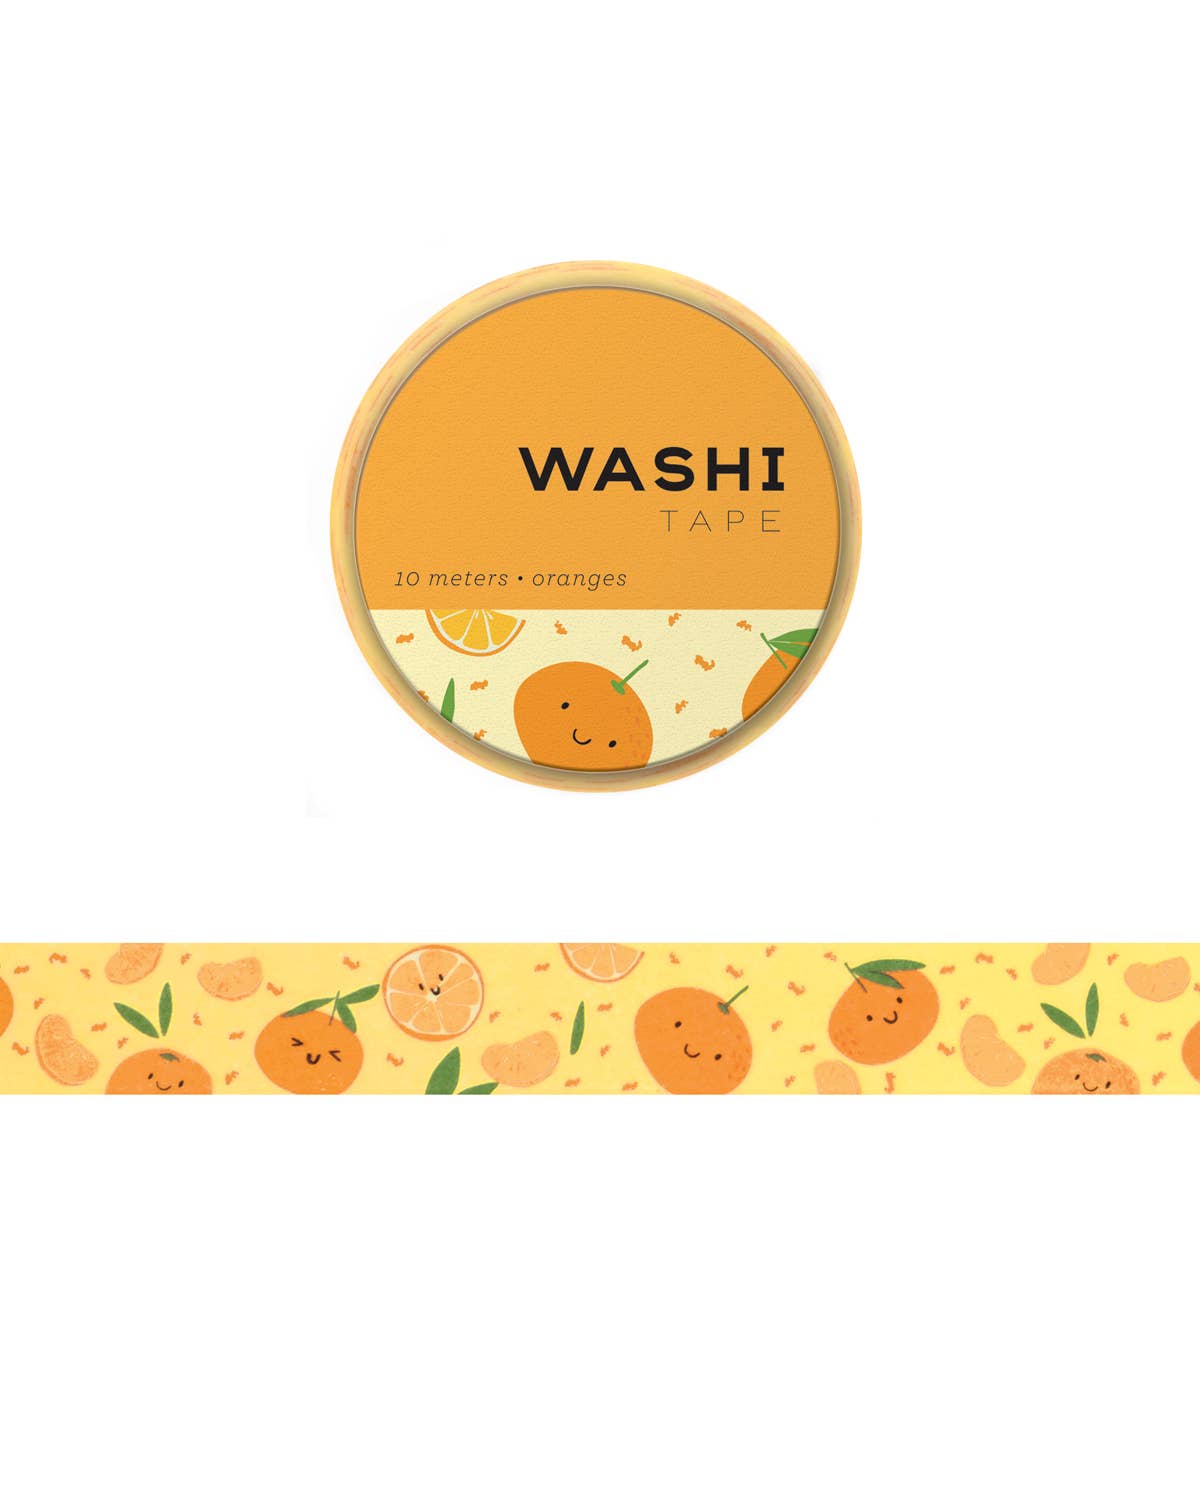 Decorative washi tape with smiley oranges on it 